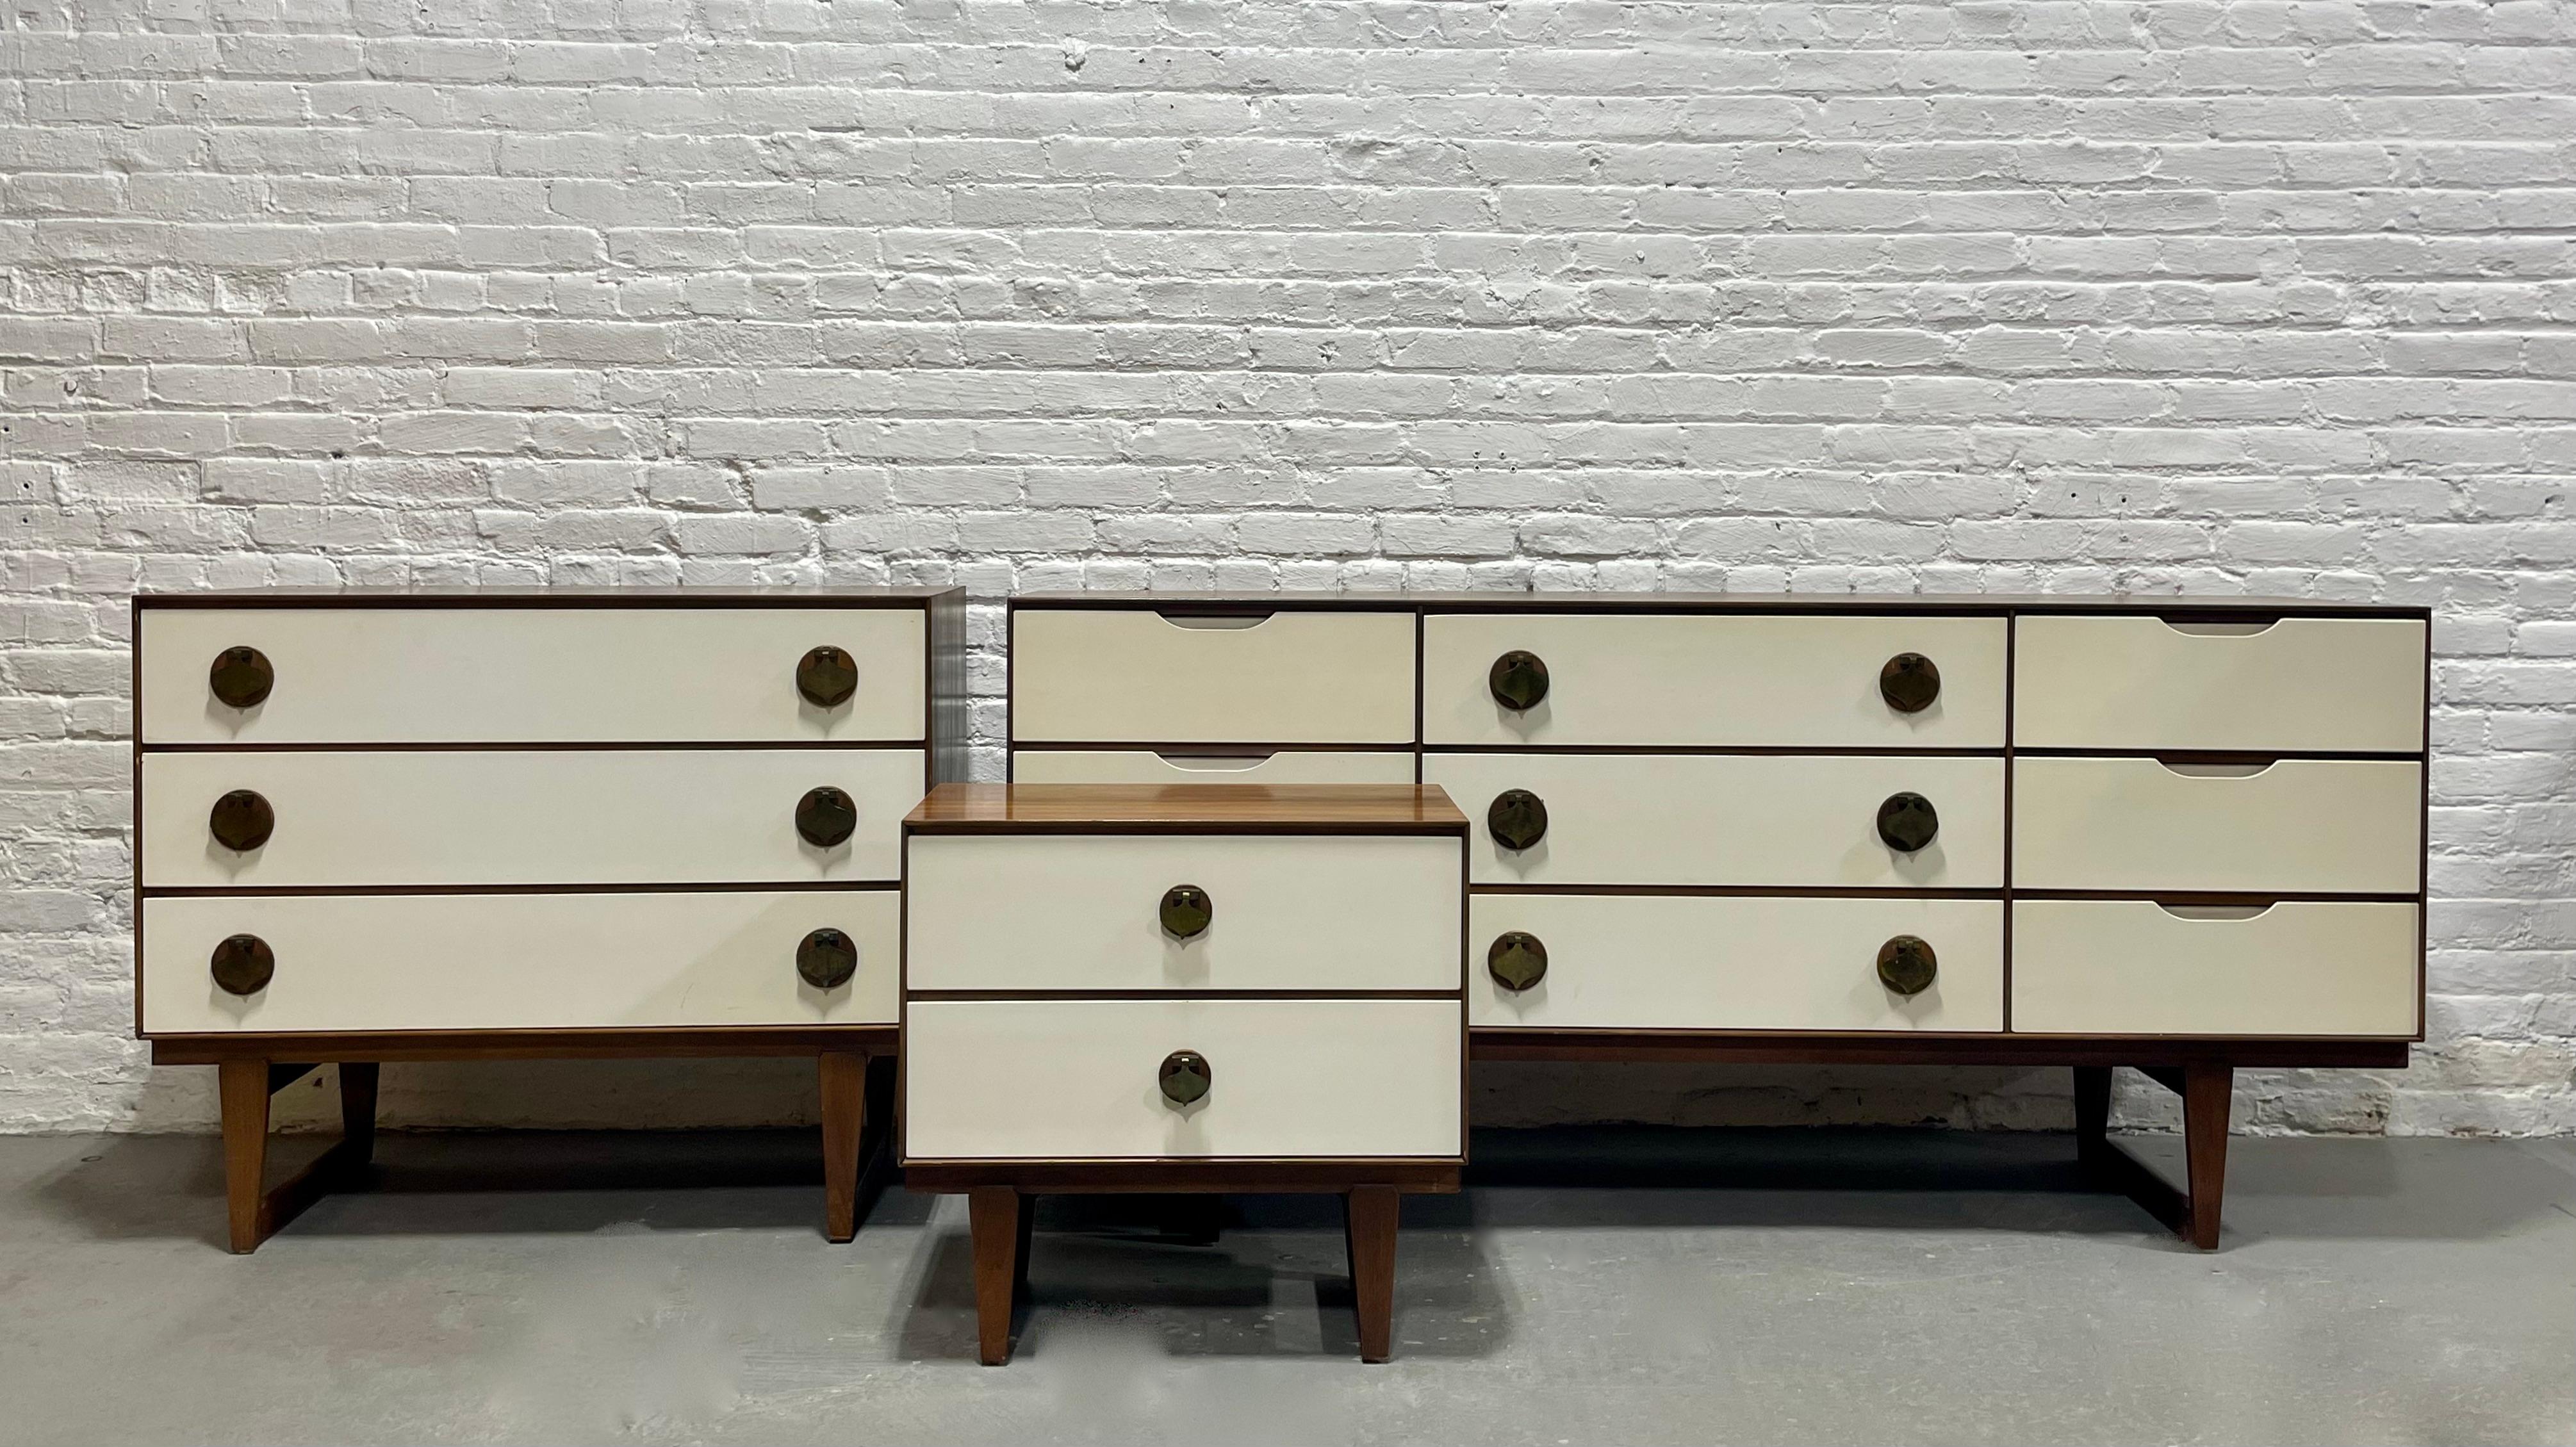 Rare + Original Mid Century Modern White & Walnut Bedroom Set by Stanley Furniture Co., c. 1960's. This elusive series was in limited production and is incredibly hard to find, especially an entire set. The pieces are highlighted by solid brass